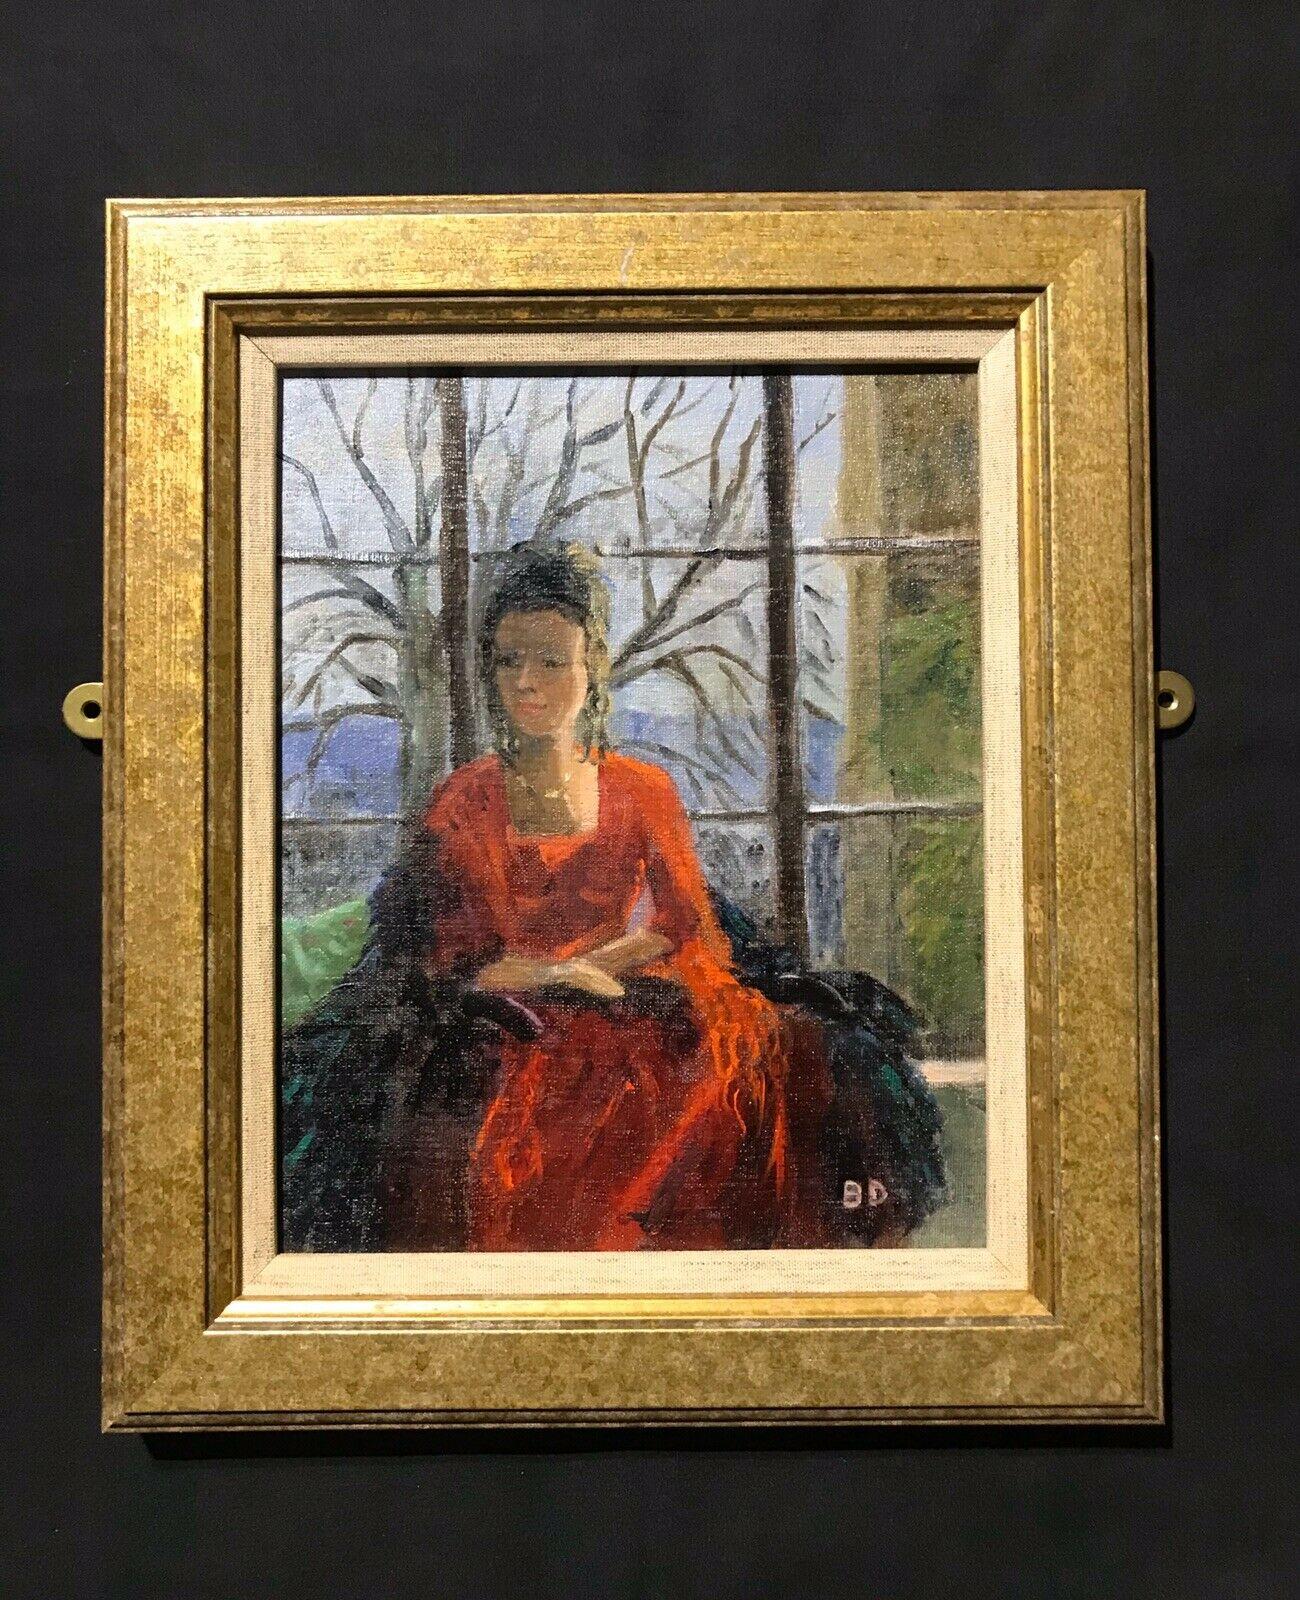 ENGLISH IMPRESSIONIST SIGNED OIL - LADY SEATED IN WINDOW SEAT LANDSCAPE BEYOND - Painting by Unknown